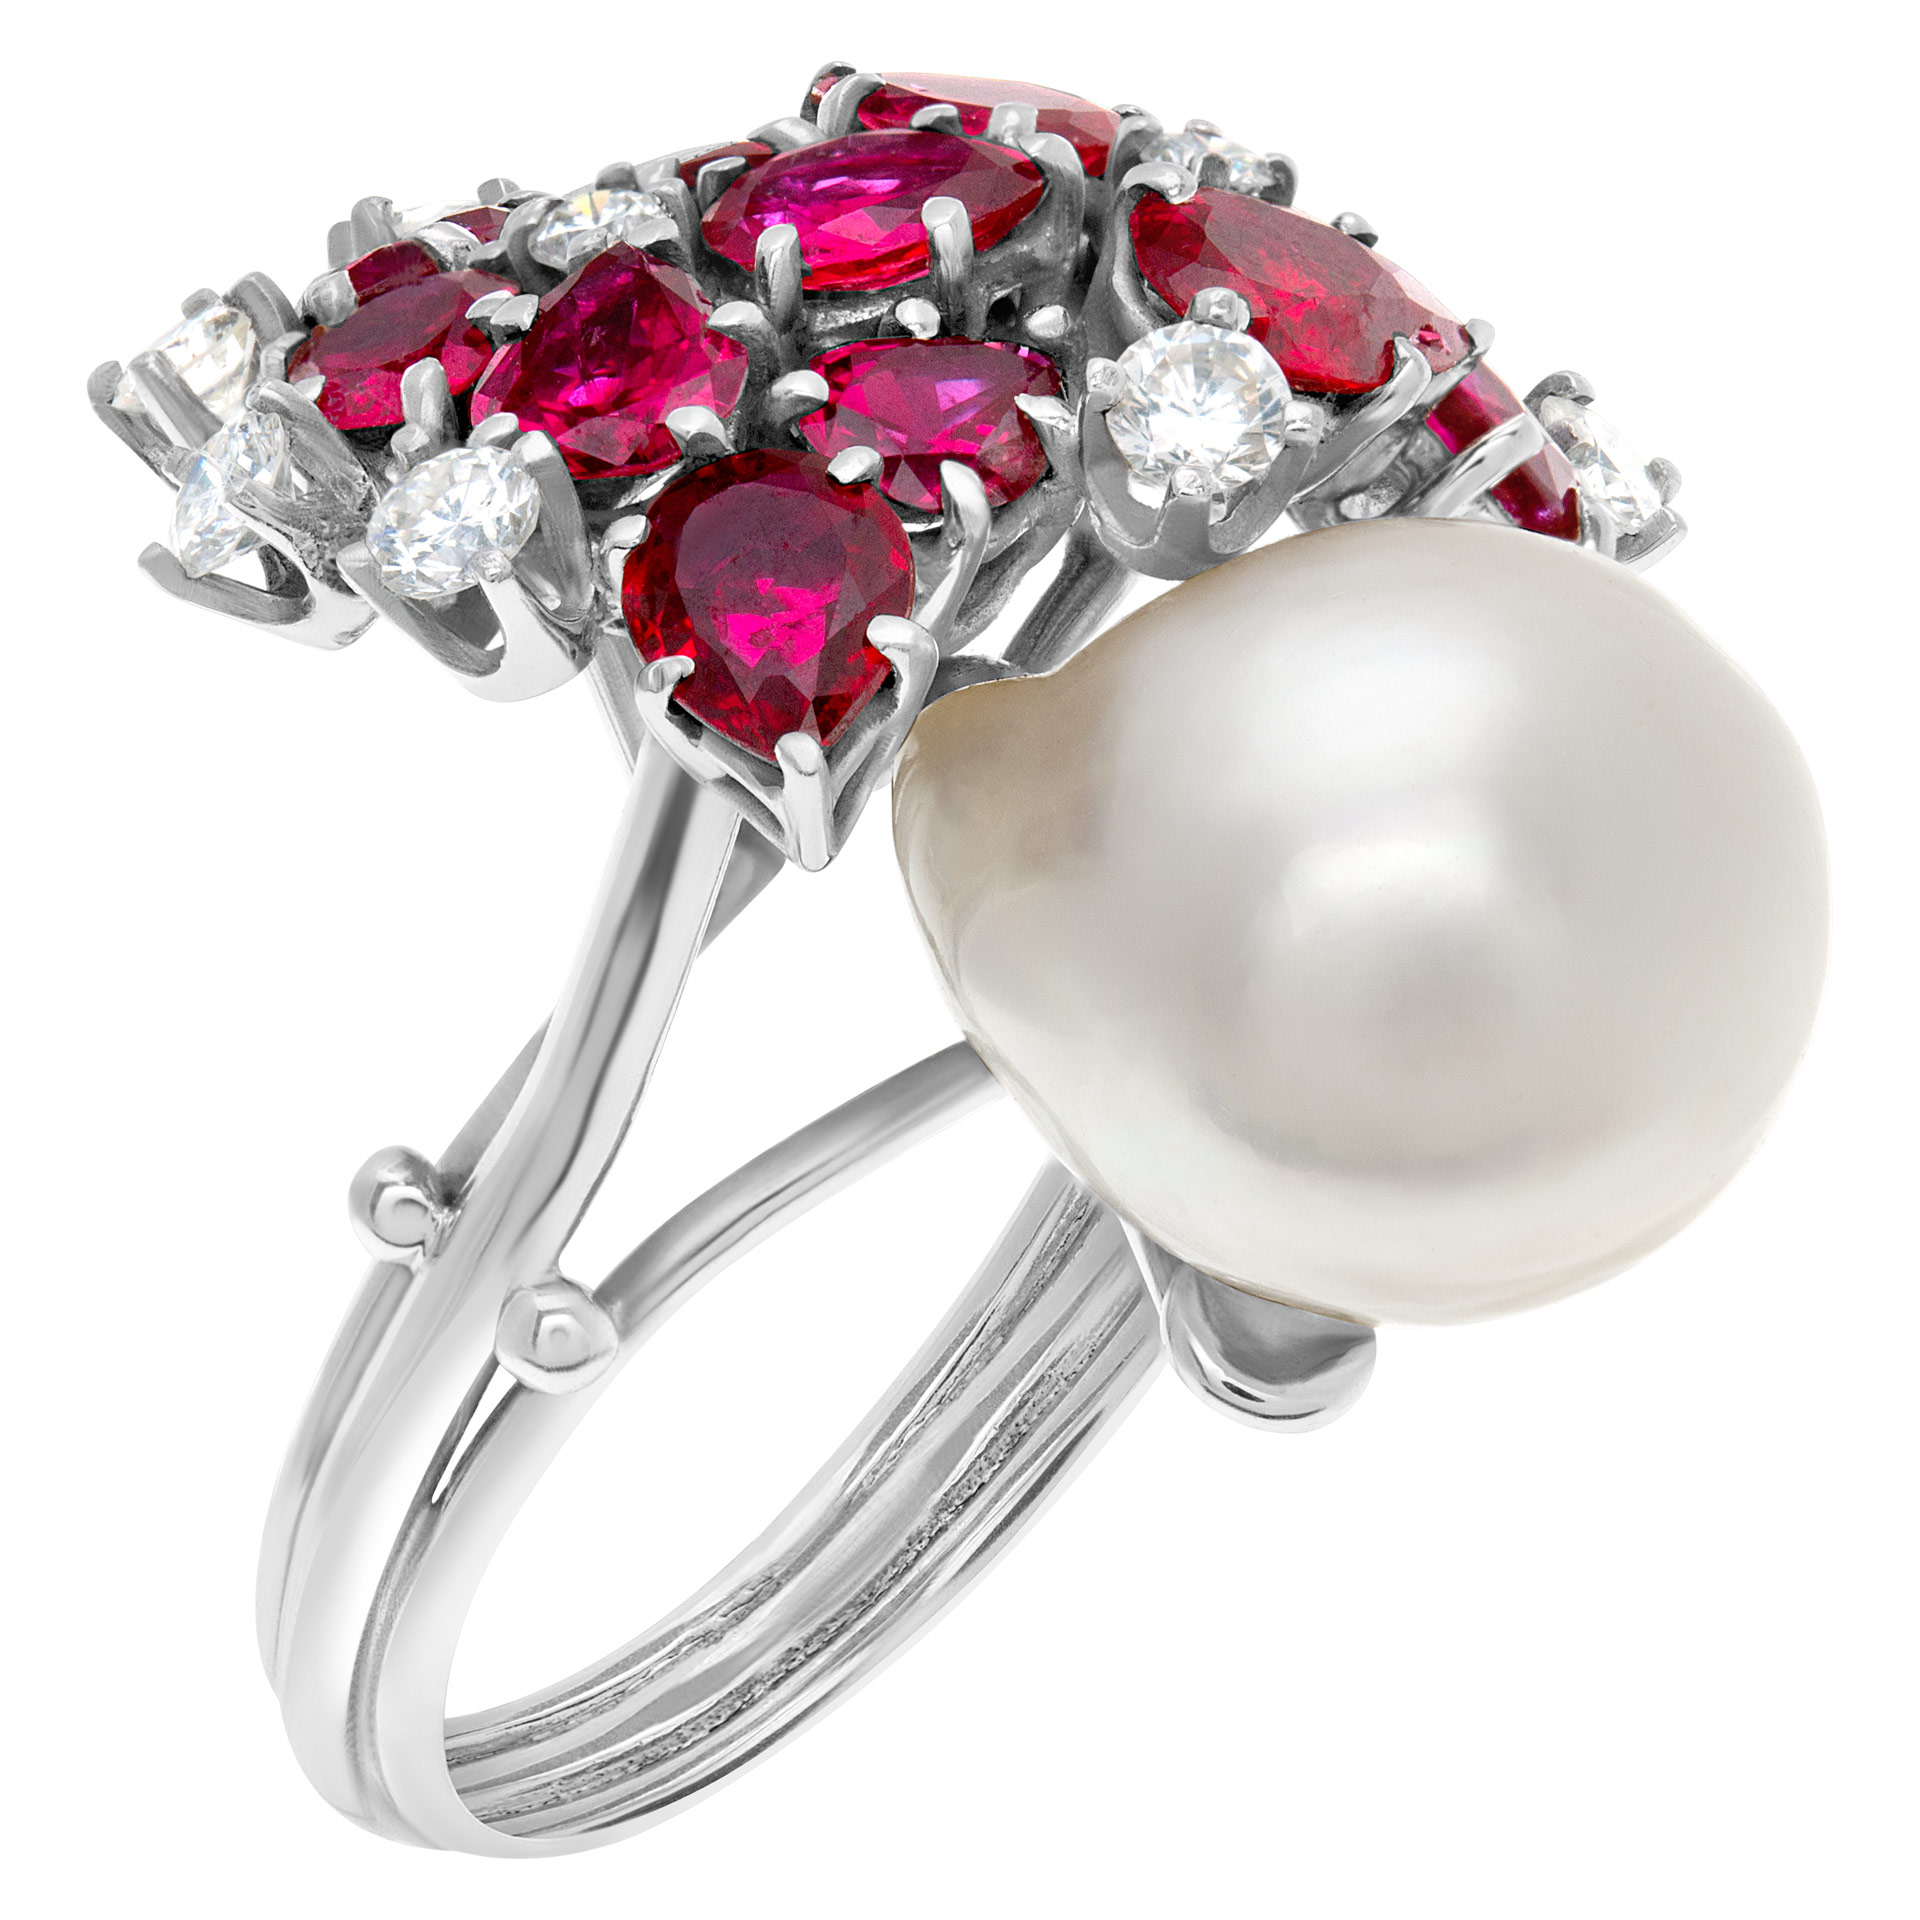 Baroque style South Sea pearl (12.9 x 15.6mm) ring with multi cut rubies & round diamond accets